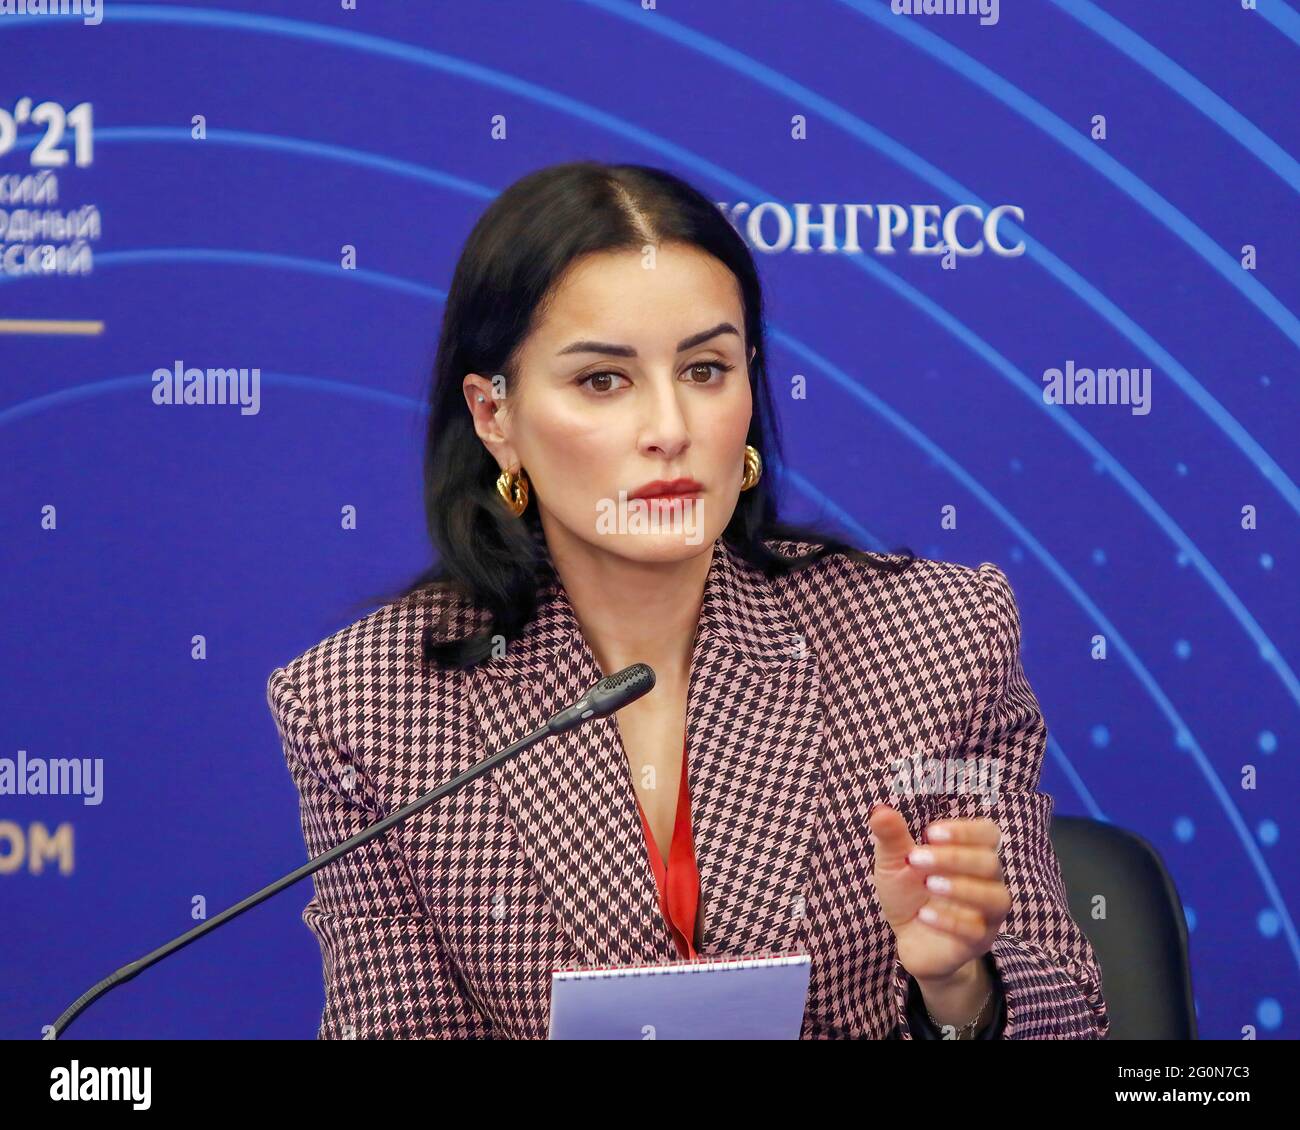 Saint Petersburg, Russia. 02nd June, 2021. Tinatin Kandelaki, General Producer, Match TV speaks at the St. Petersburg International Economic Forum (SPIEF) on "What Will Russia Come Up with Next?". Credit: SOPA Images Limited/Alamy Live News Stock Photo